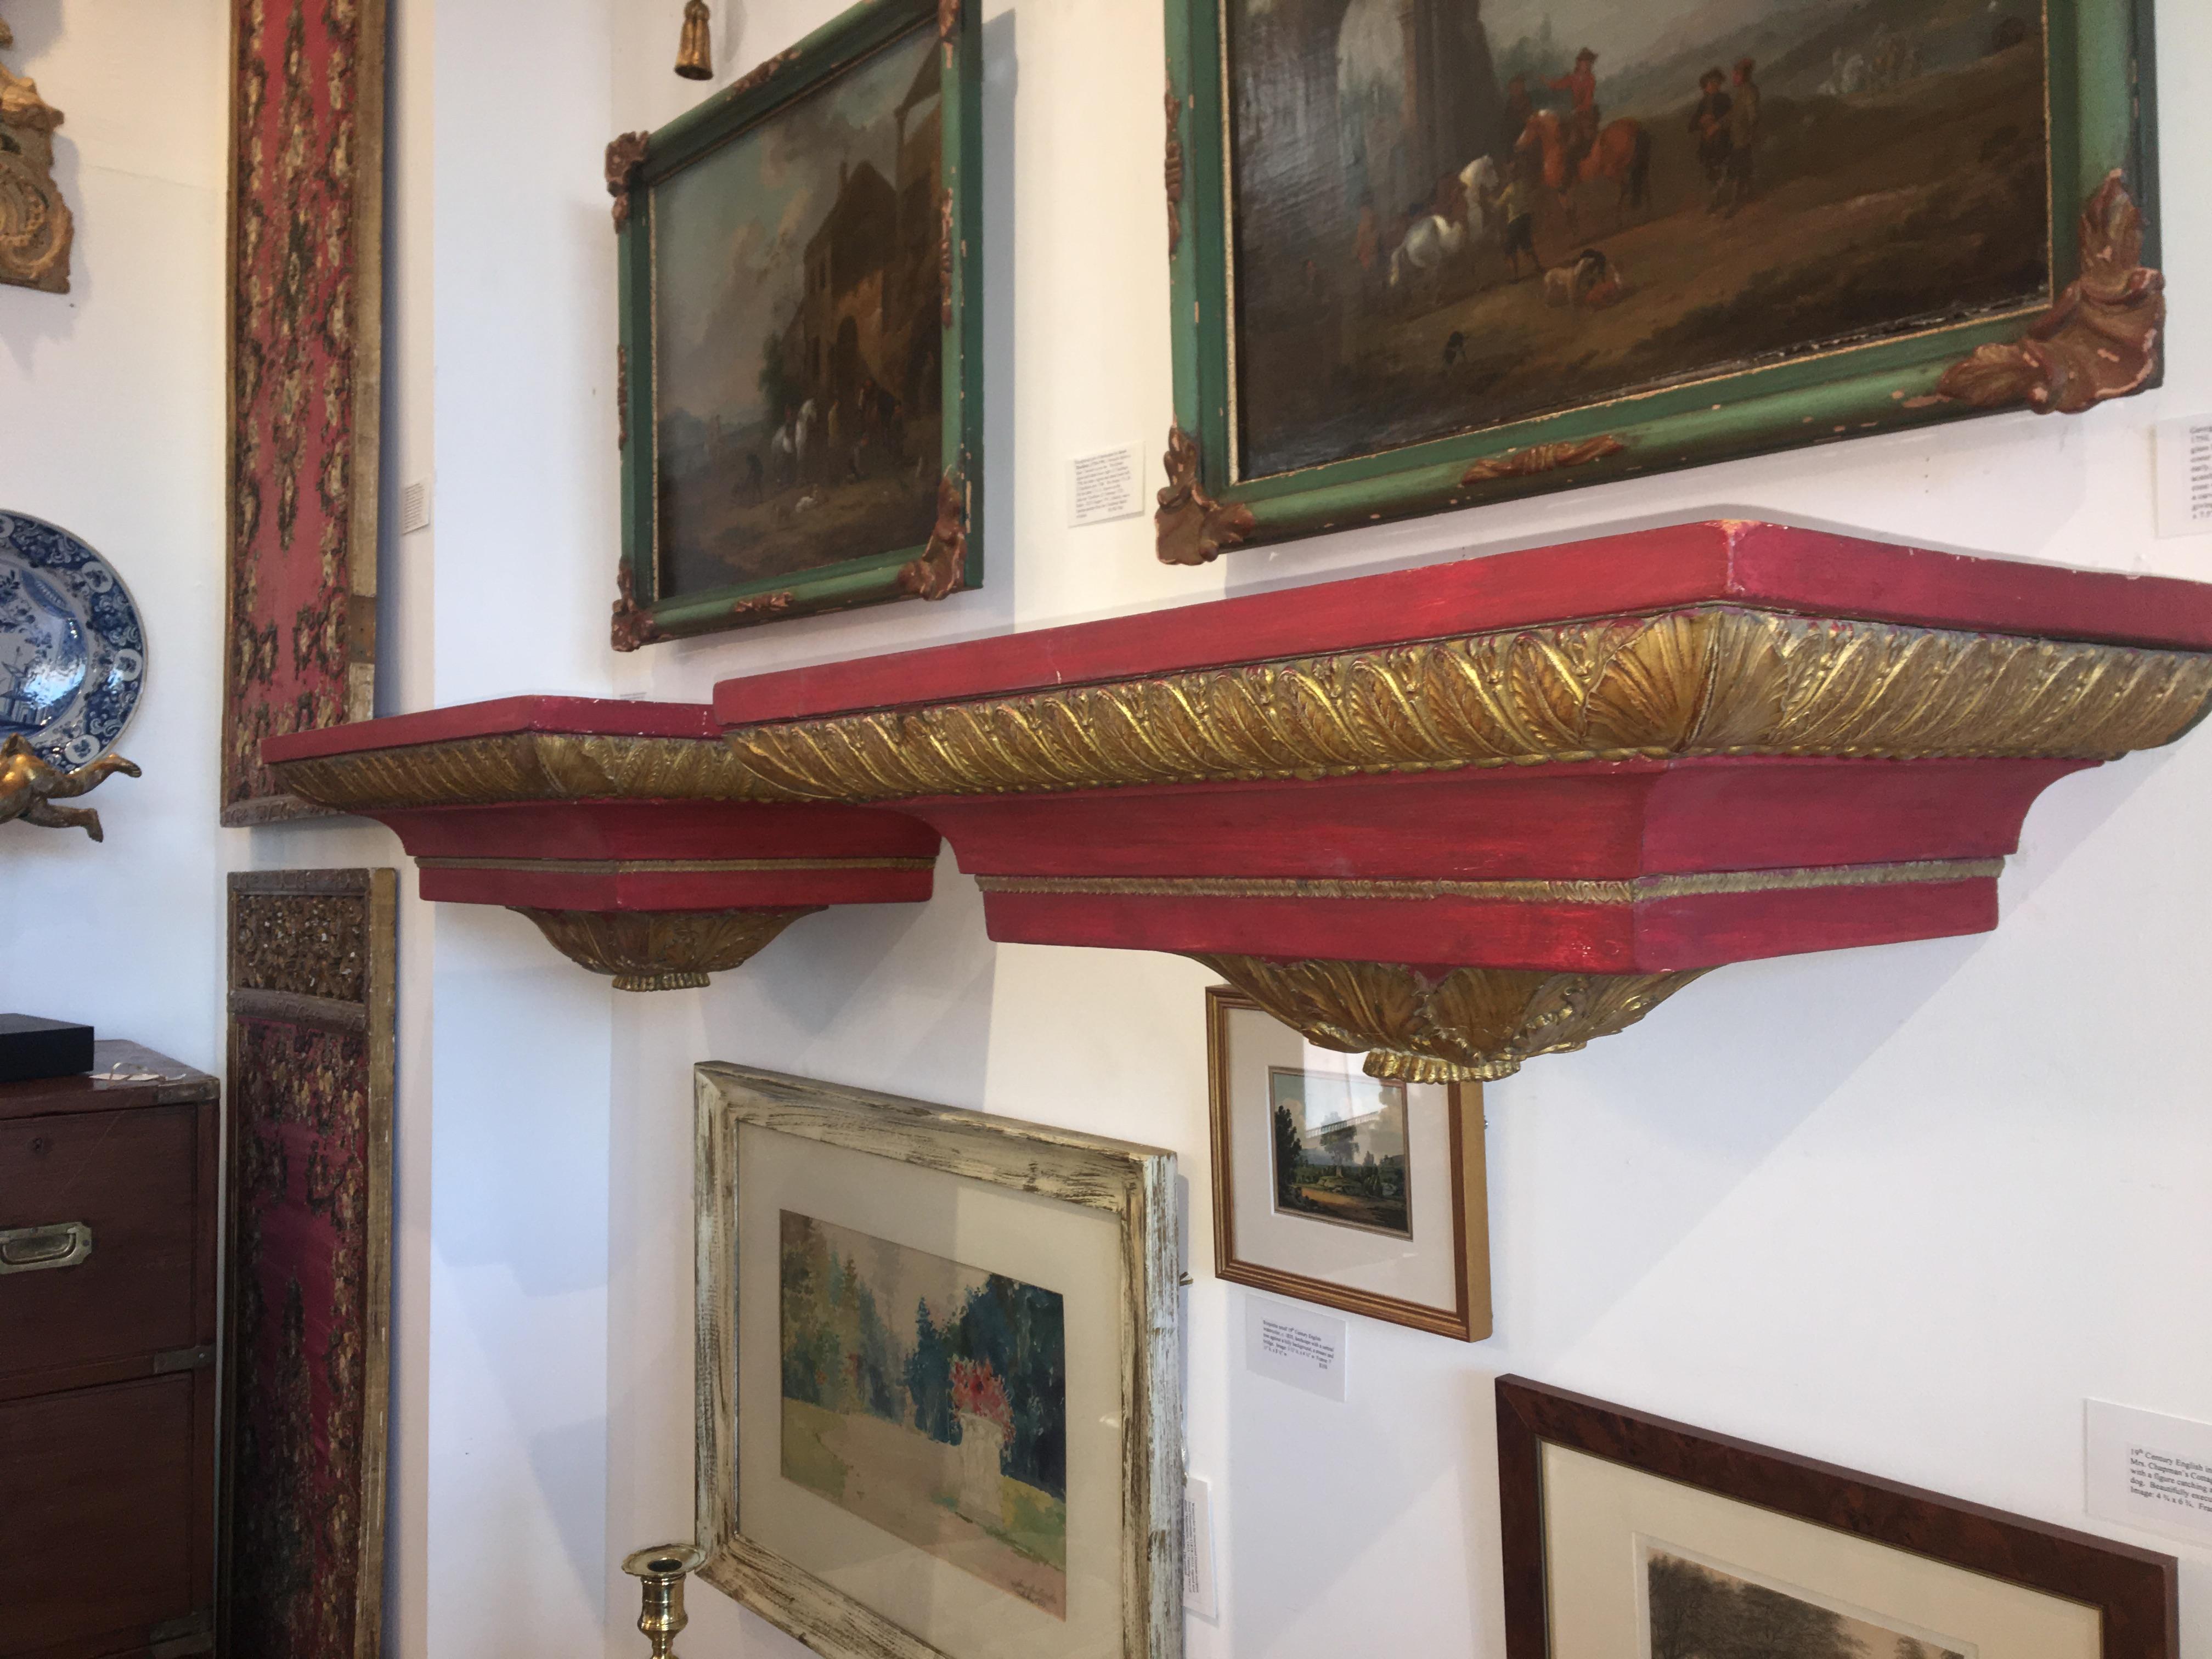 A pair of European, possibly Swedish, architectural red and parcel-gilt wall shelves, early 20th Century constructed using beautifully carved 18th century moldings.